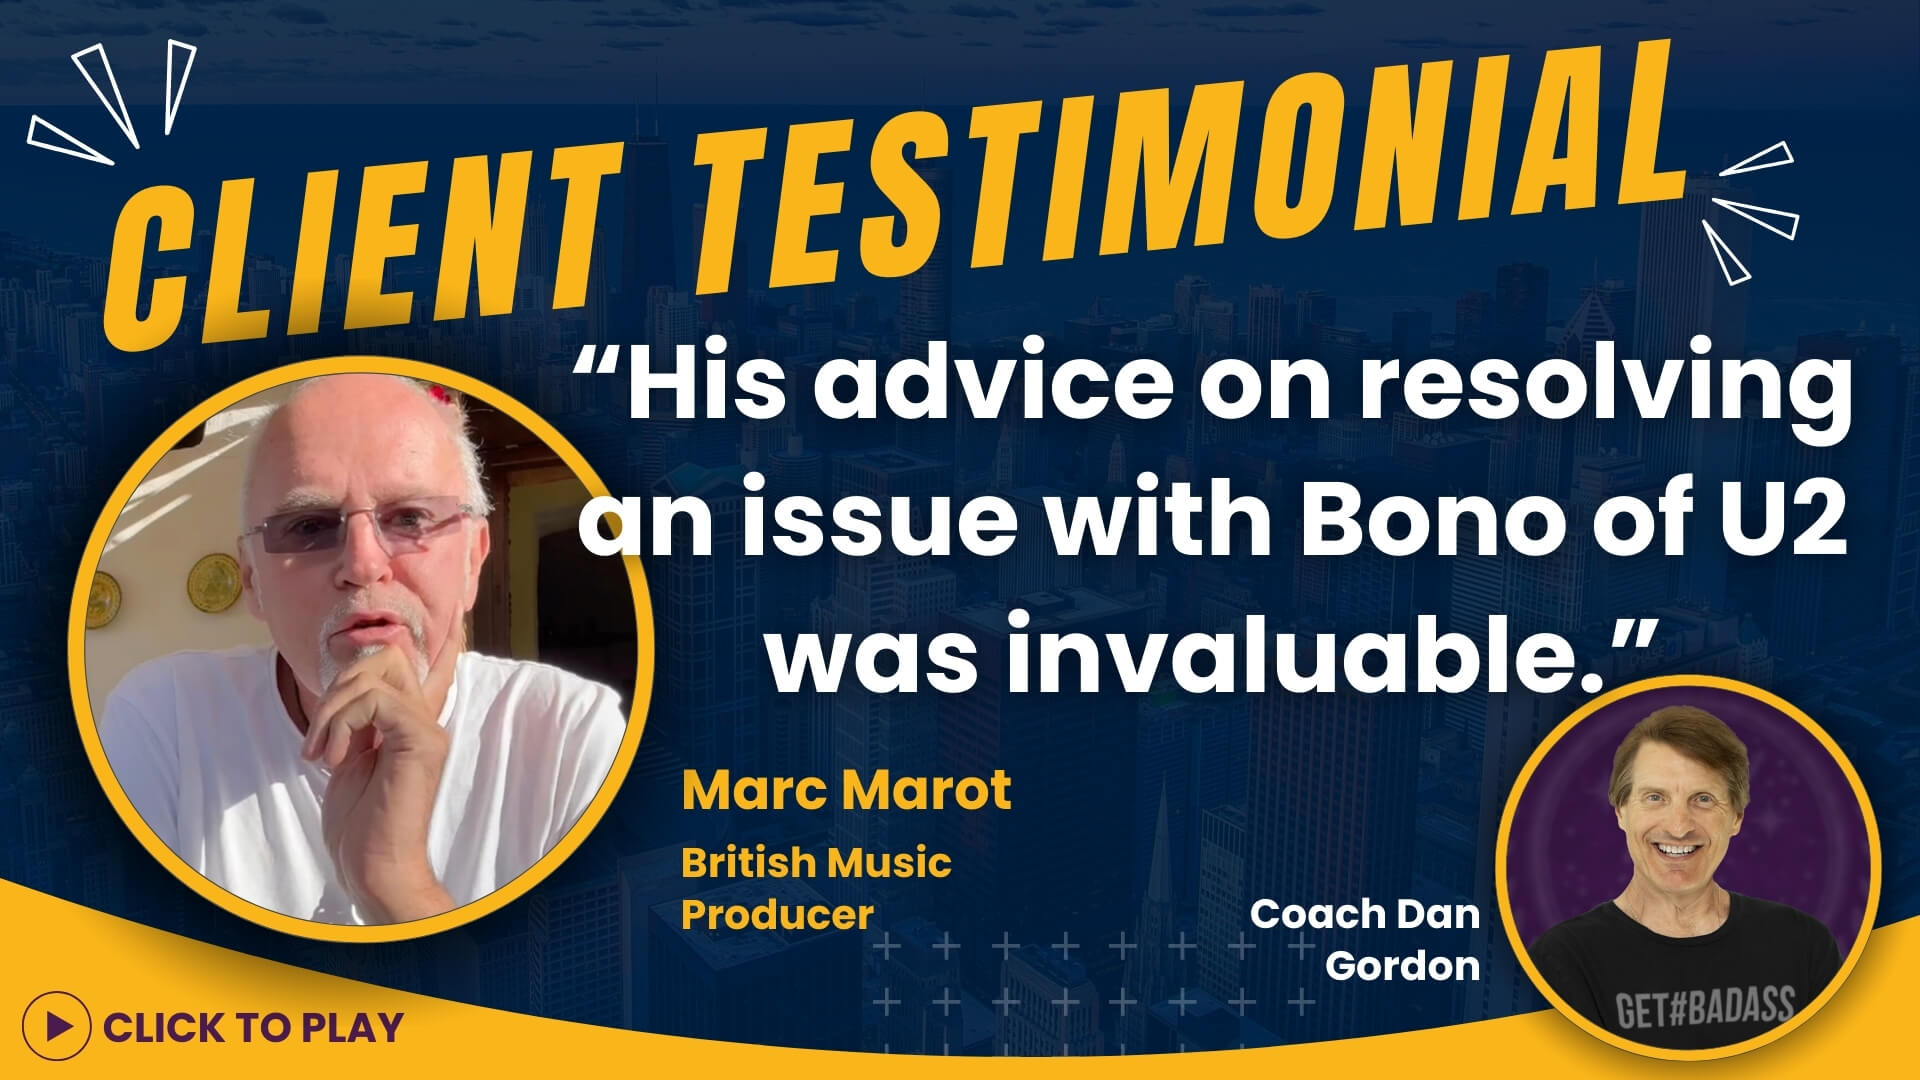 British Music Producer Marc Marot commends Coach Dan Gordon, with both featured in smiling portraits and a testimonial quote about invaluable advice.